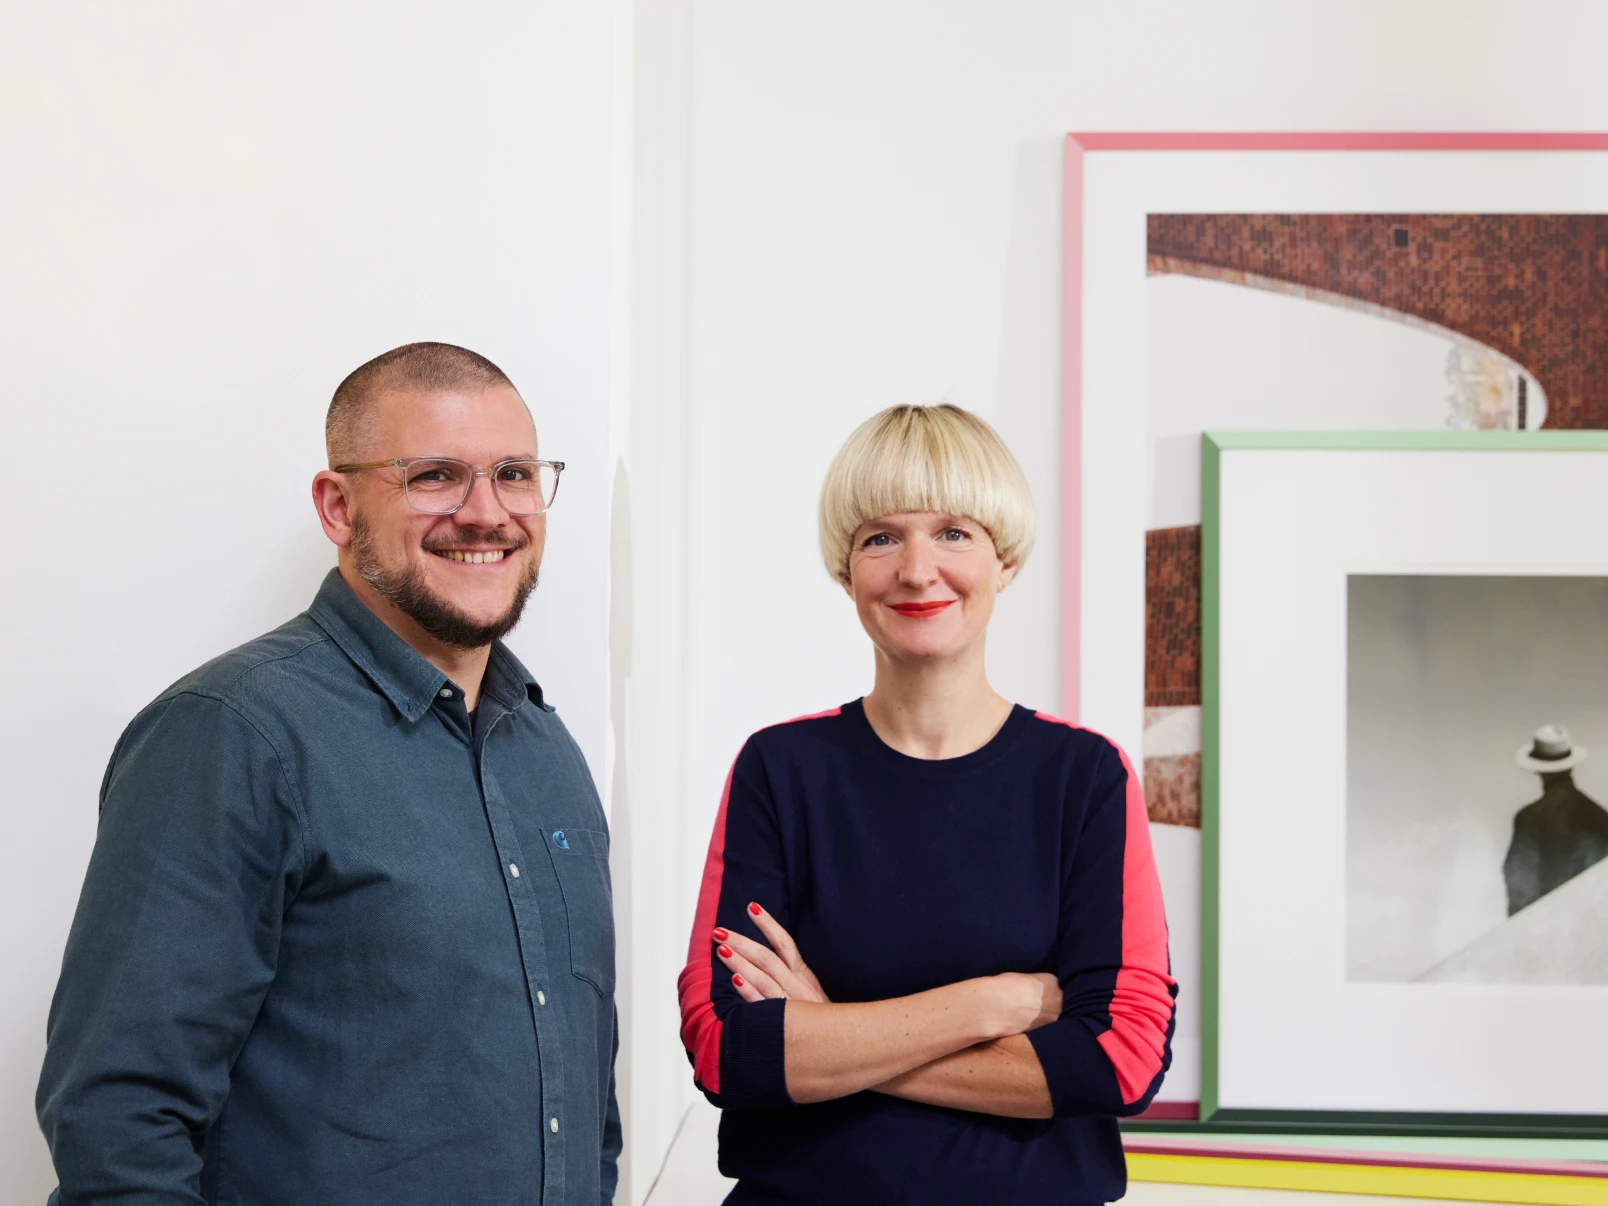 Image of the designers Eva Marguerre and Marcel Besau, standing next to each other.